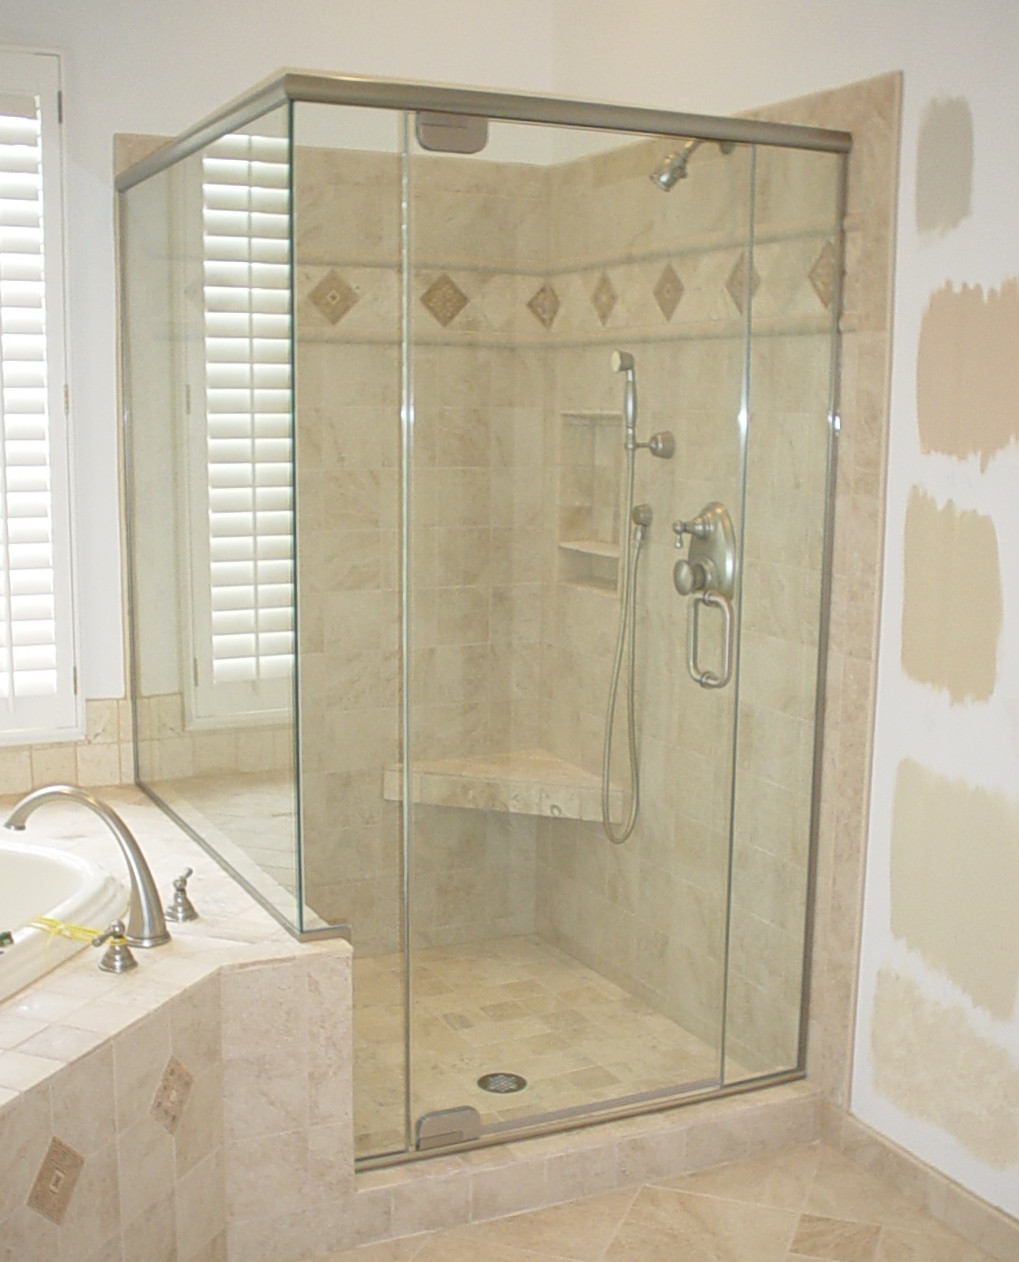 Bathroom Shower Panels
 Shower Glass Panel Ideas for a Small Bathroom at Your